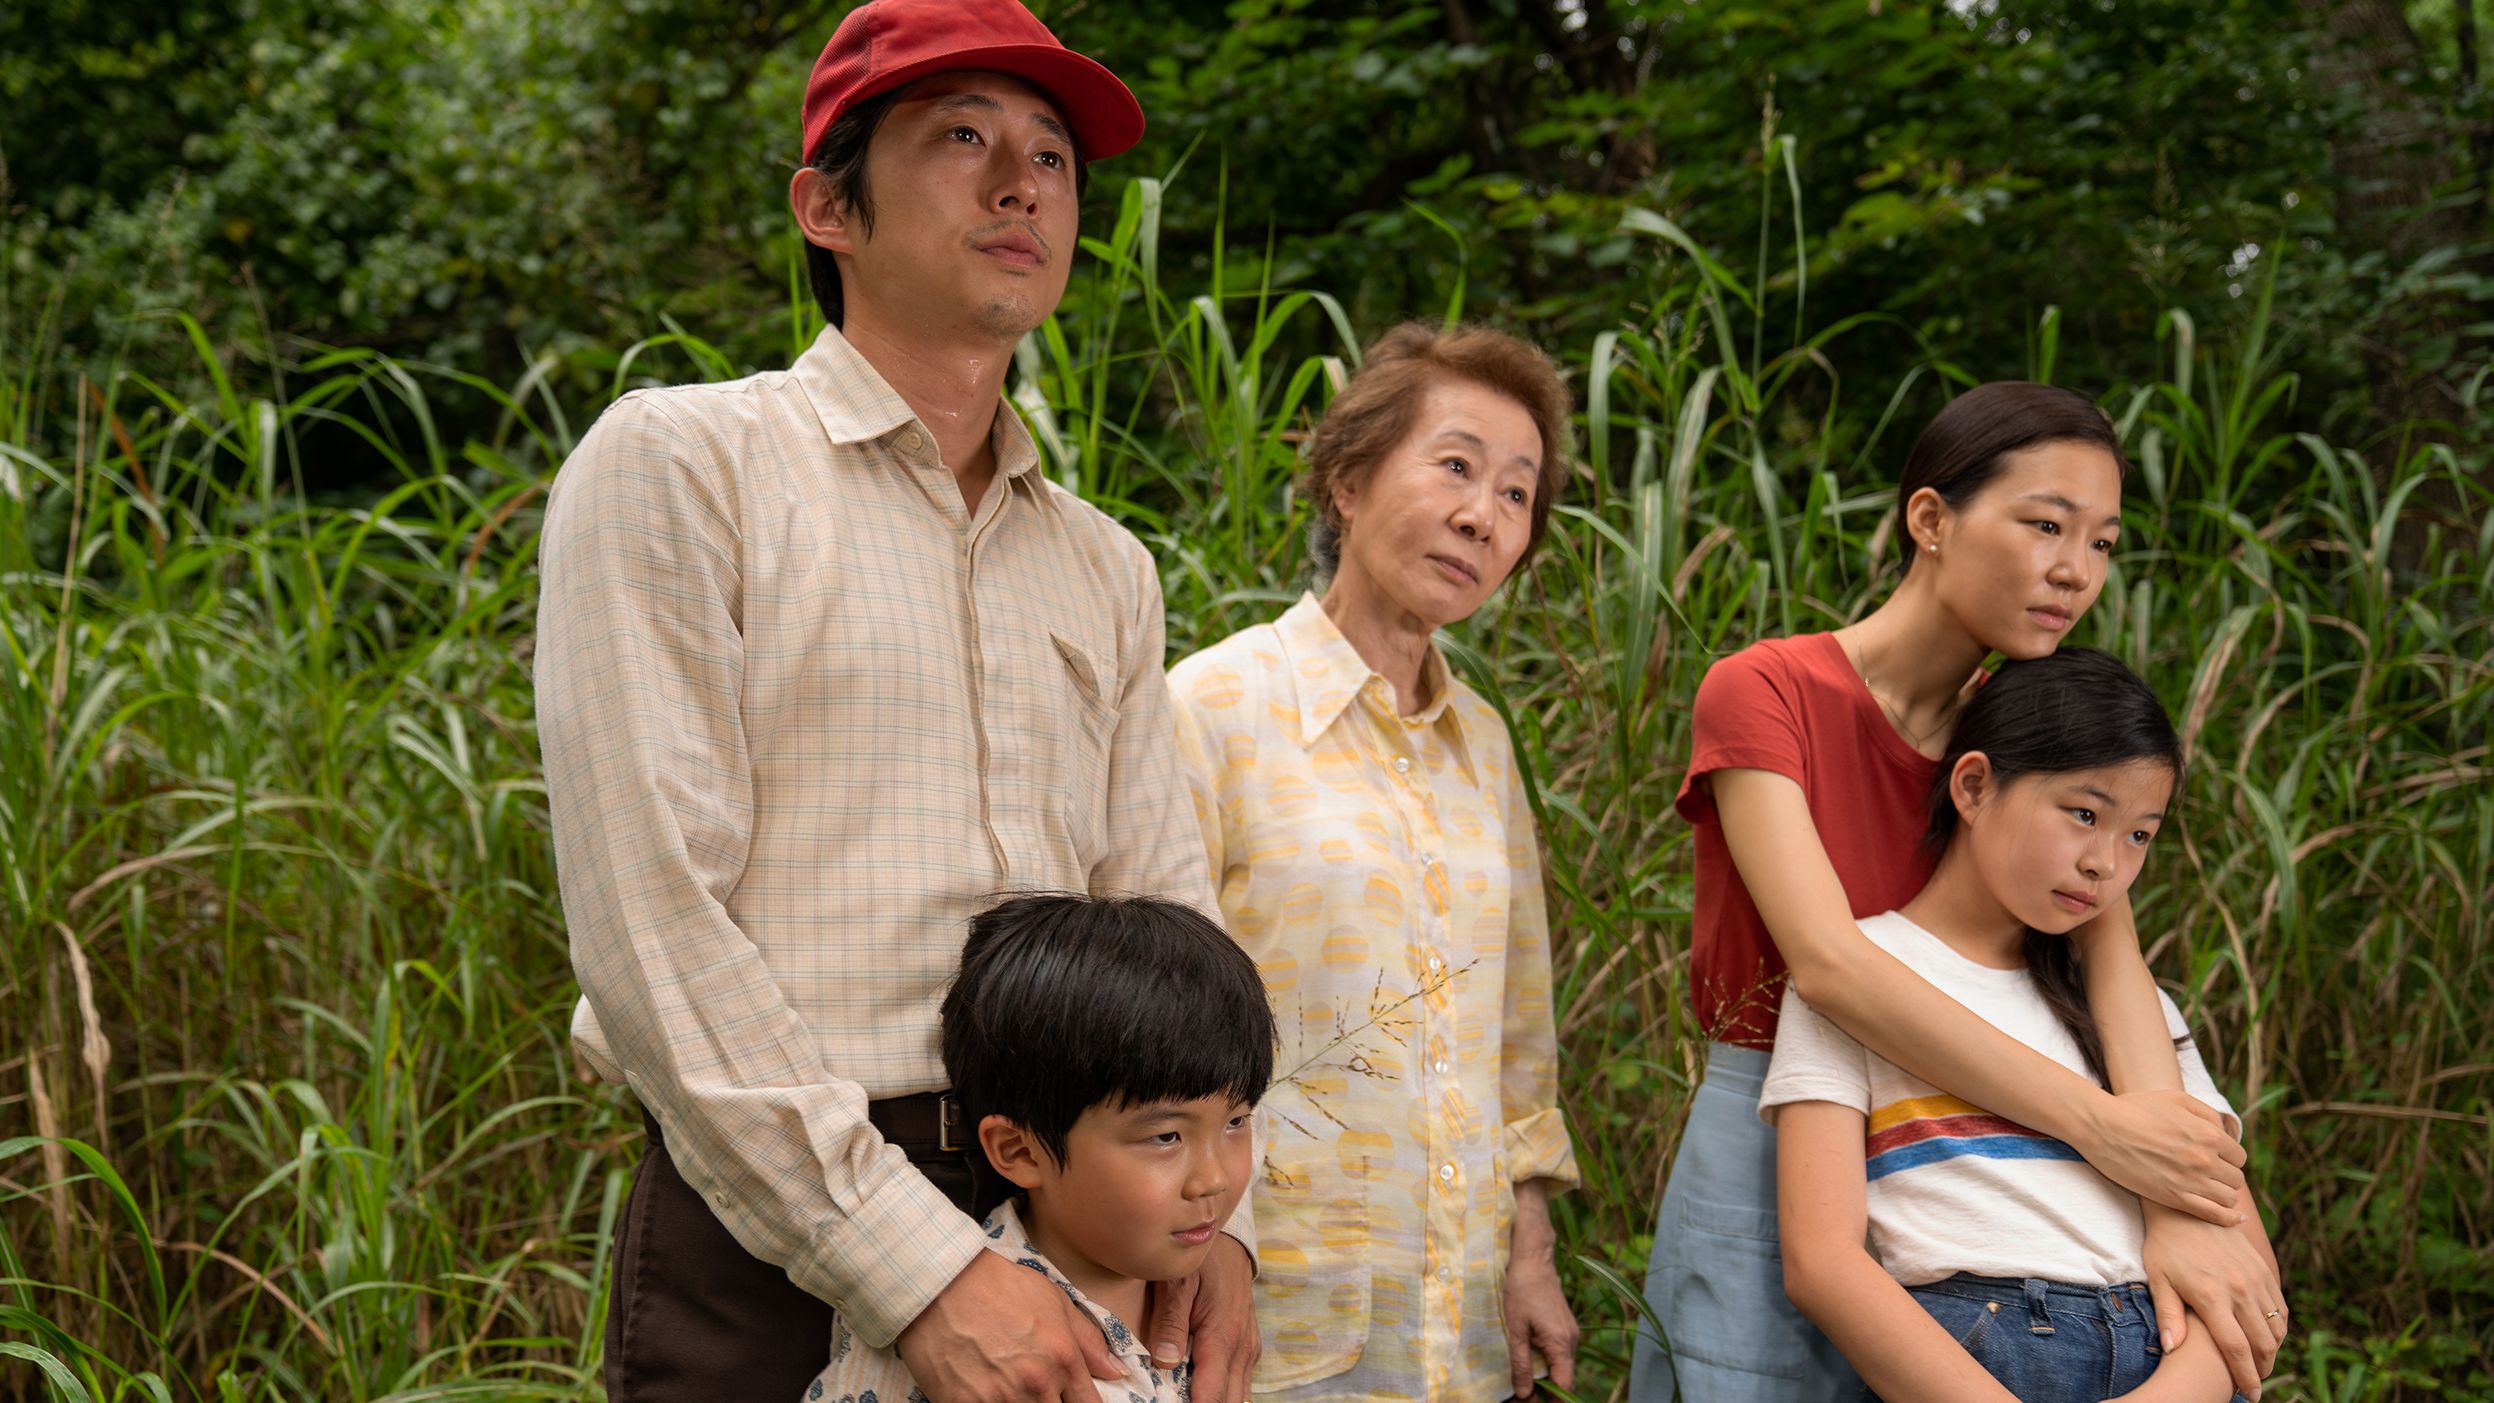 "Minari" takes place in Arkansas, and the family at the heart of the story speaks Korean for much of the movie. That made the American film ineligible for best picture at the Golden Globes.